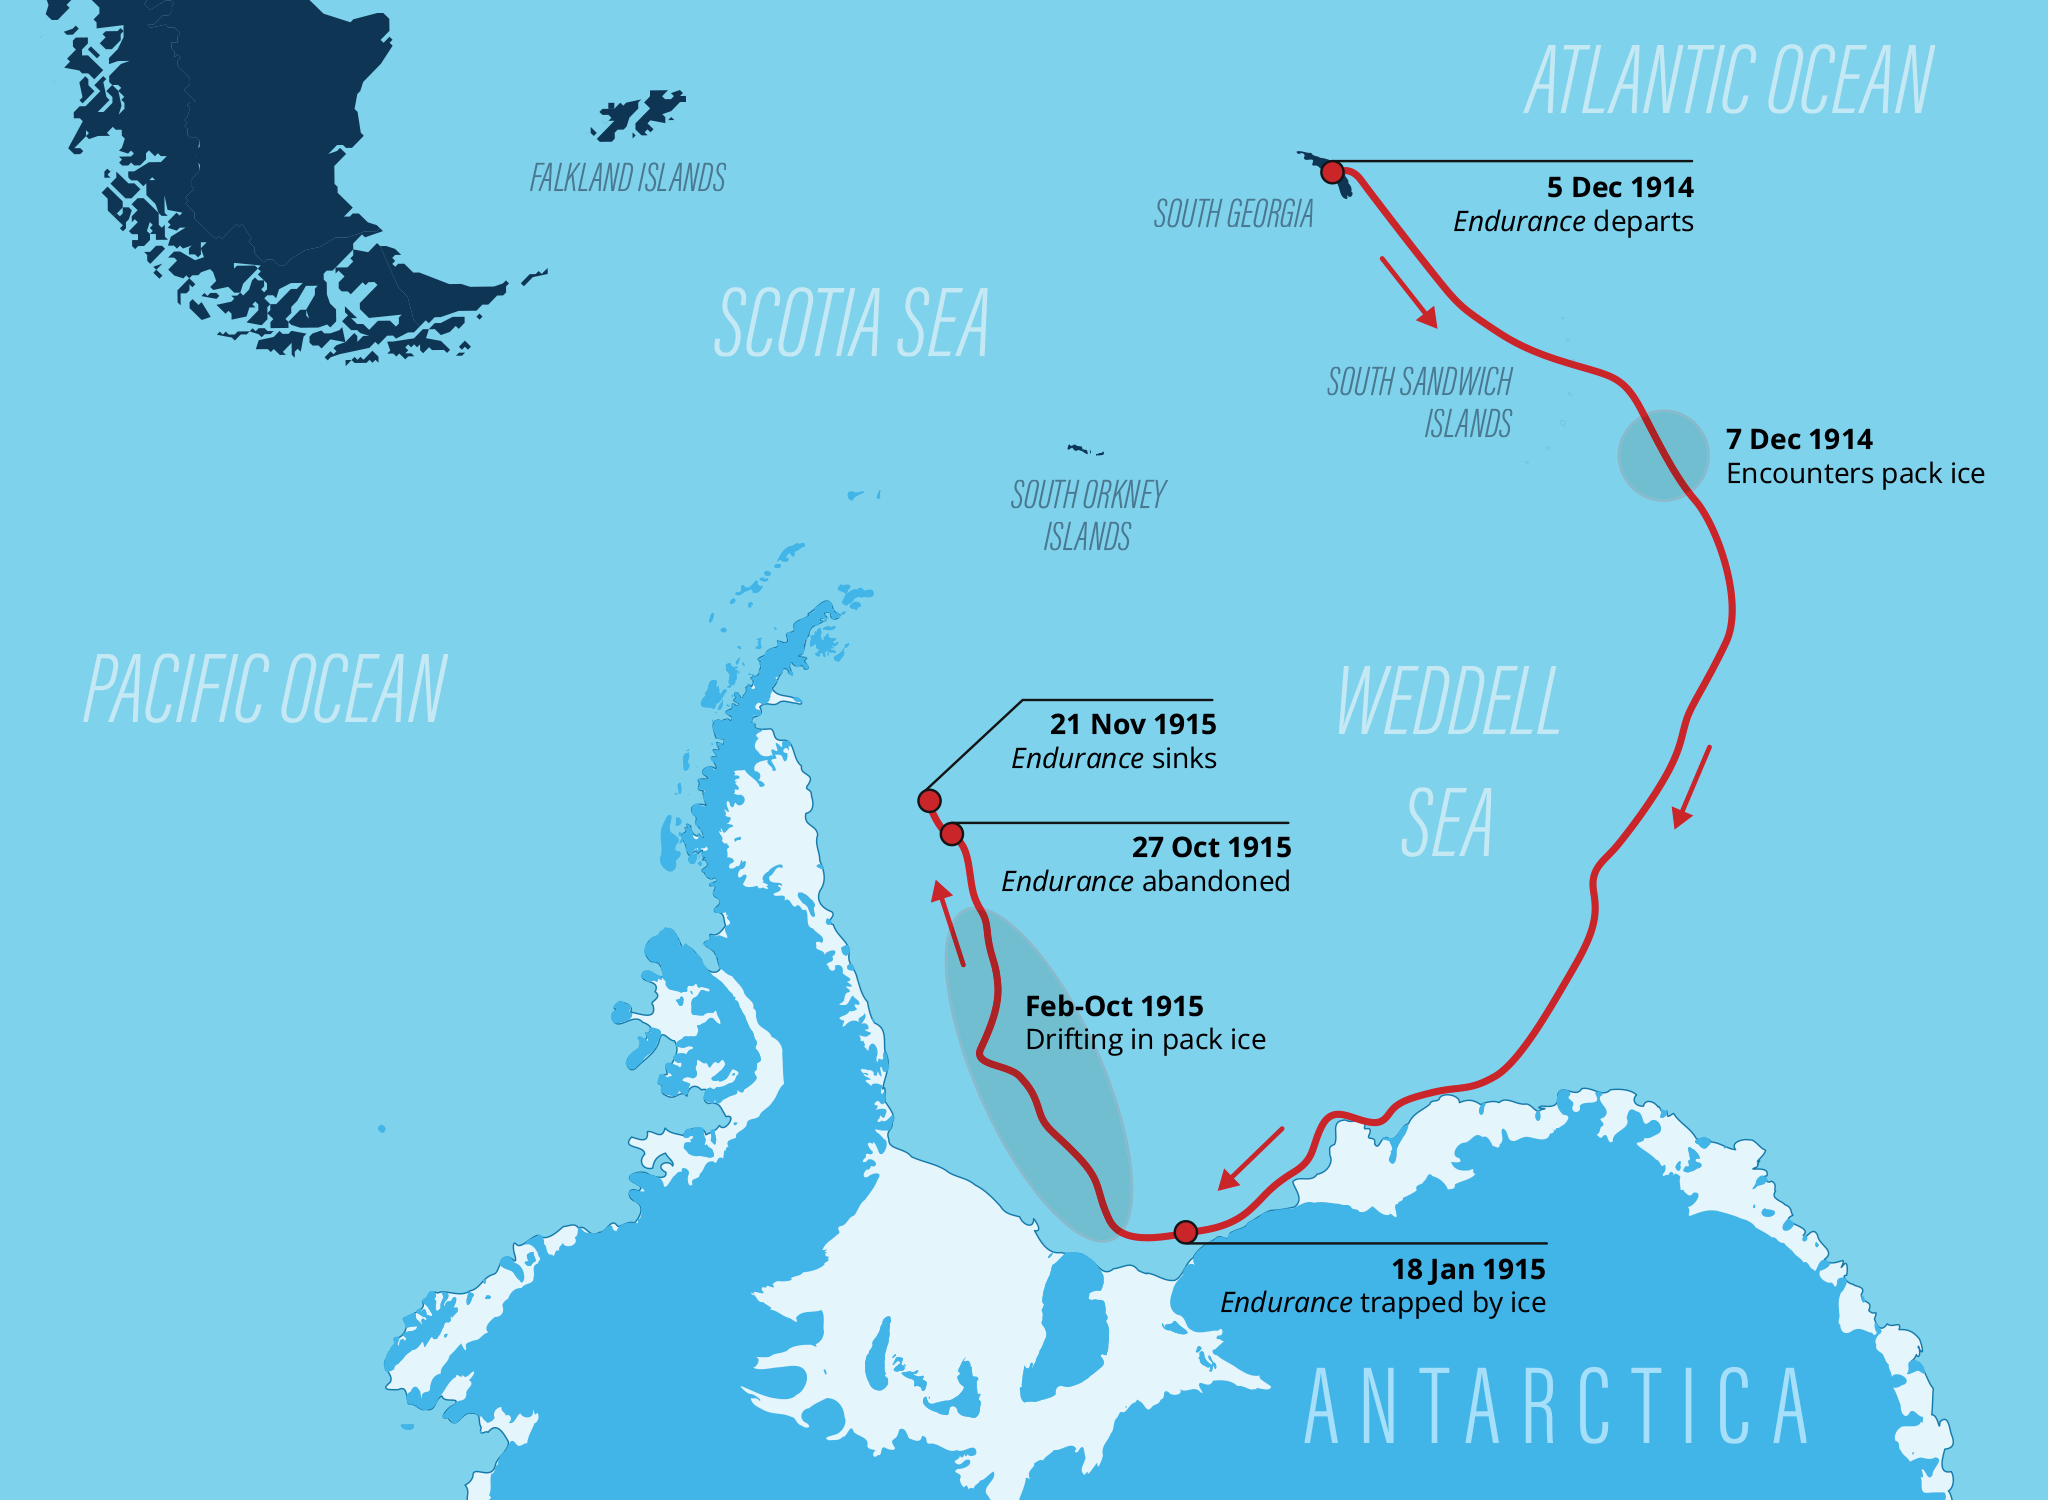 Shackleton's Endurance expedition route